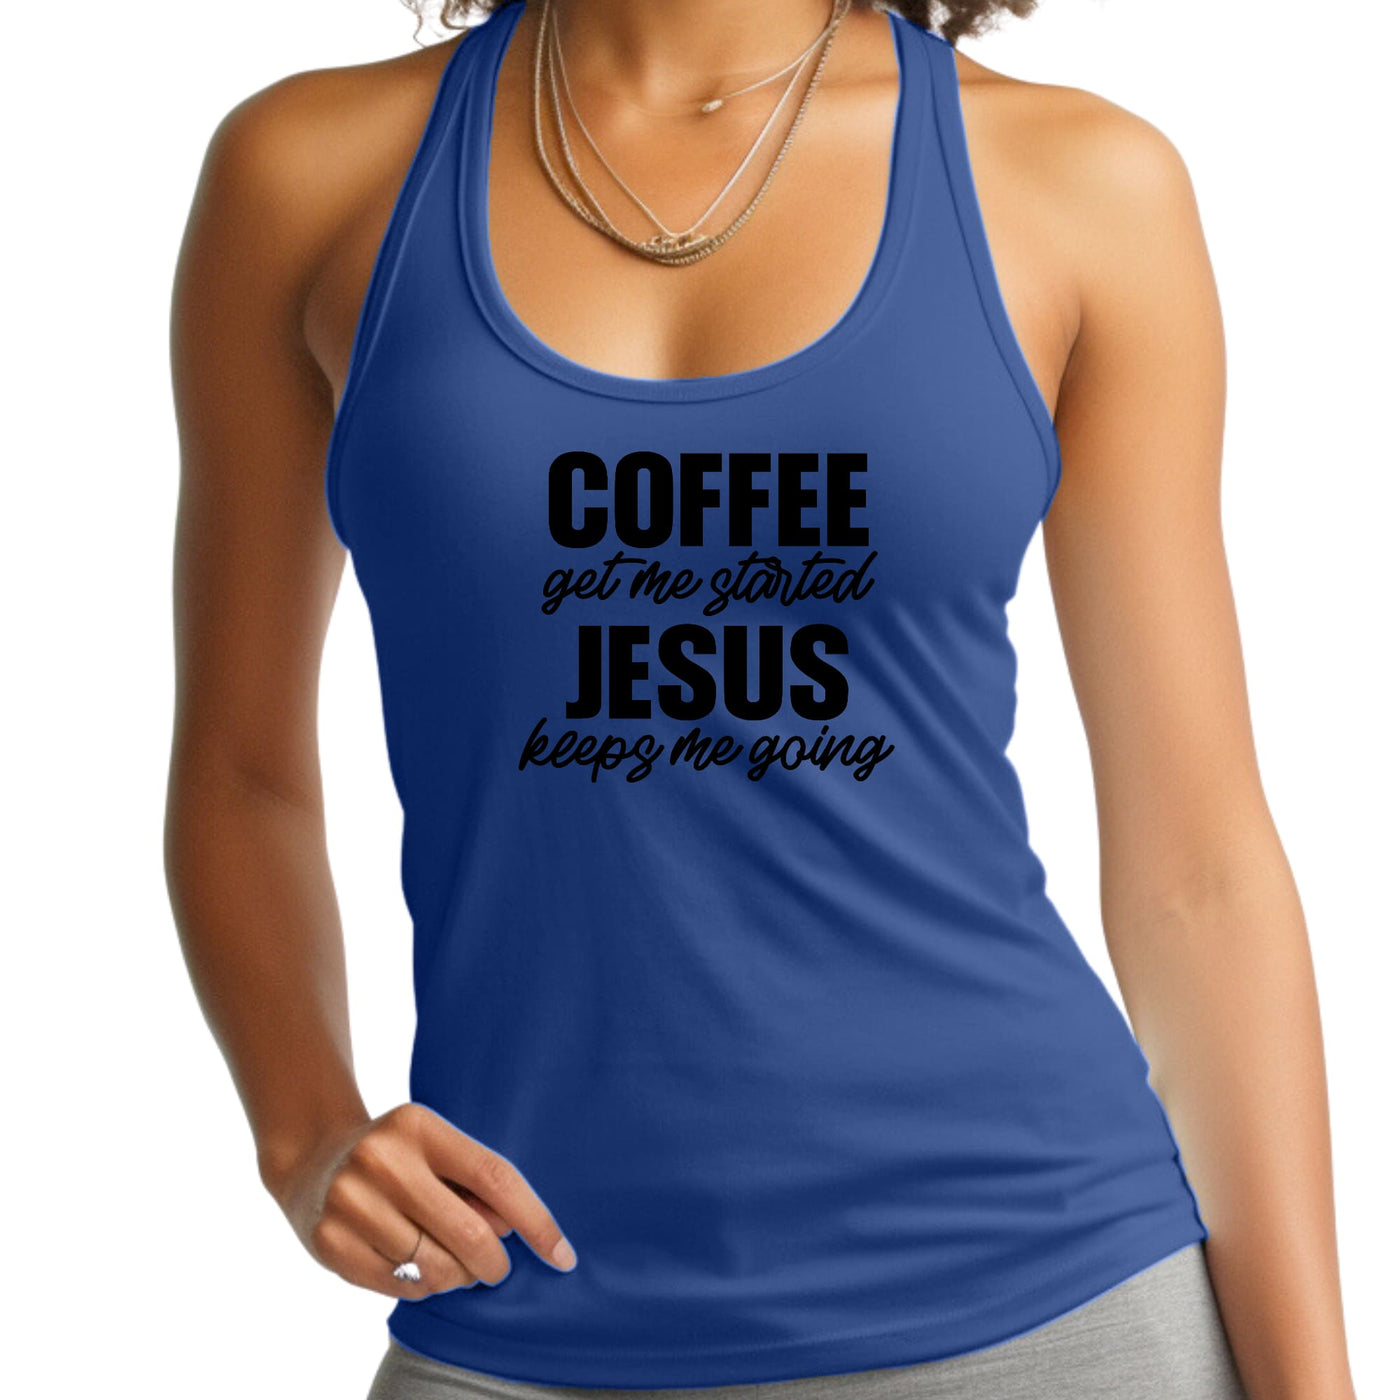 Womens Fitness Tank Top Graphic T-shirt Coffee Get Me Started Jesus - Womens